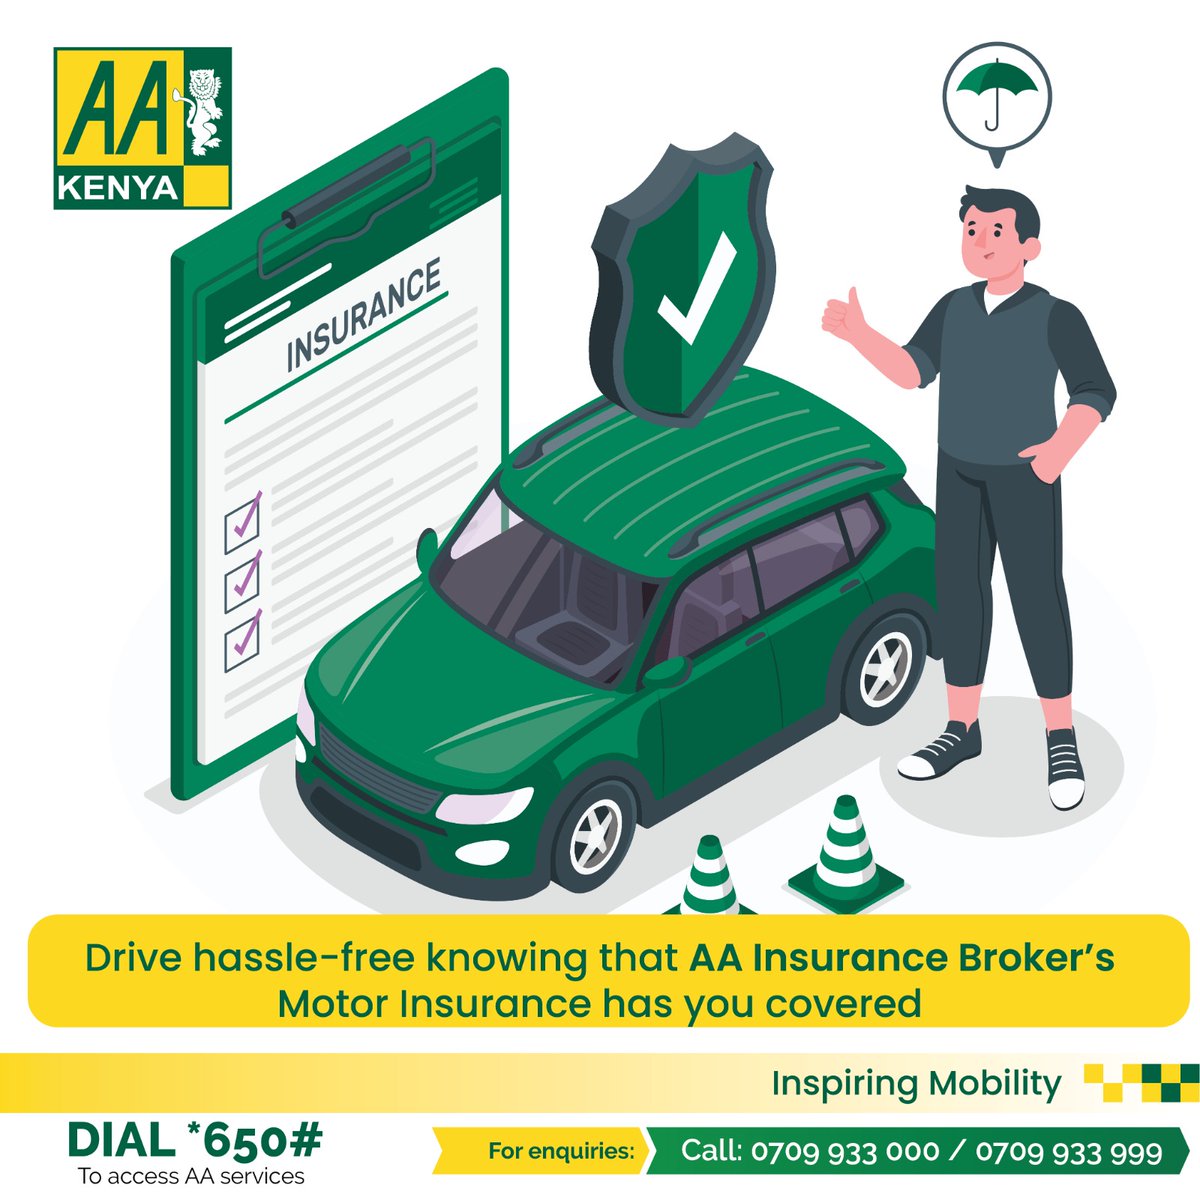 Don't let an accident derail your plans. Protect your vehicle with AA Insurance Broker’s comprehensive motor insurance. Get a free quote now, call us on 0720940636/0709933000
#AAIBCares #MotorInsurance